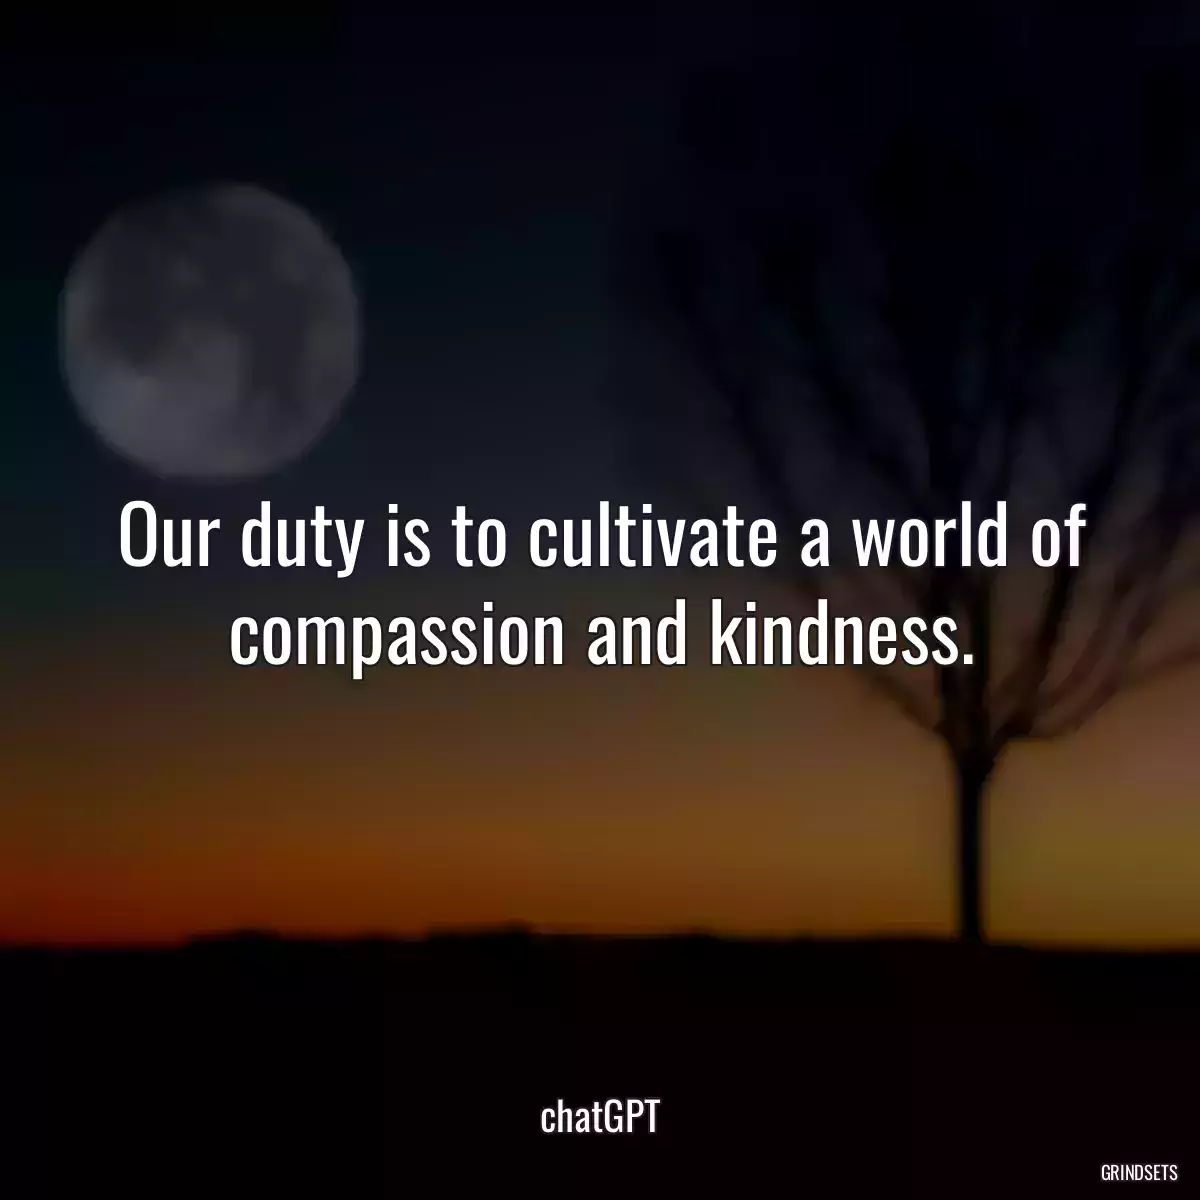 Our duty is to cultivate a world of compassion and kindness.